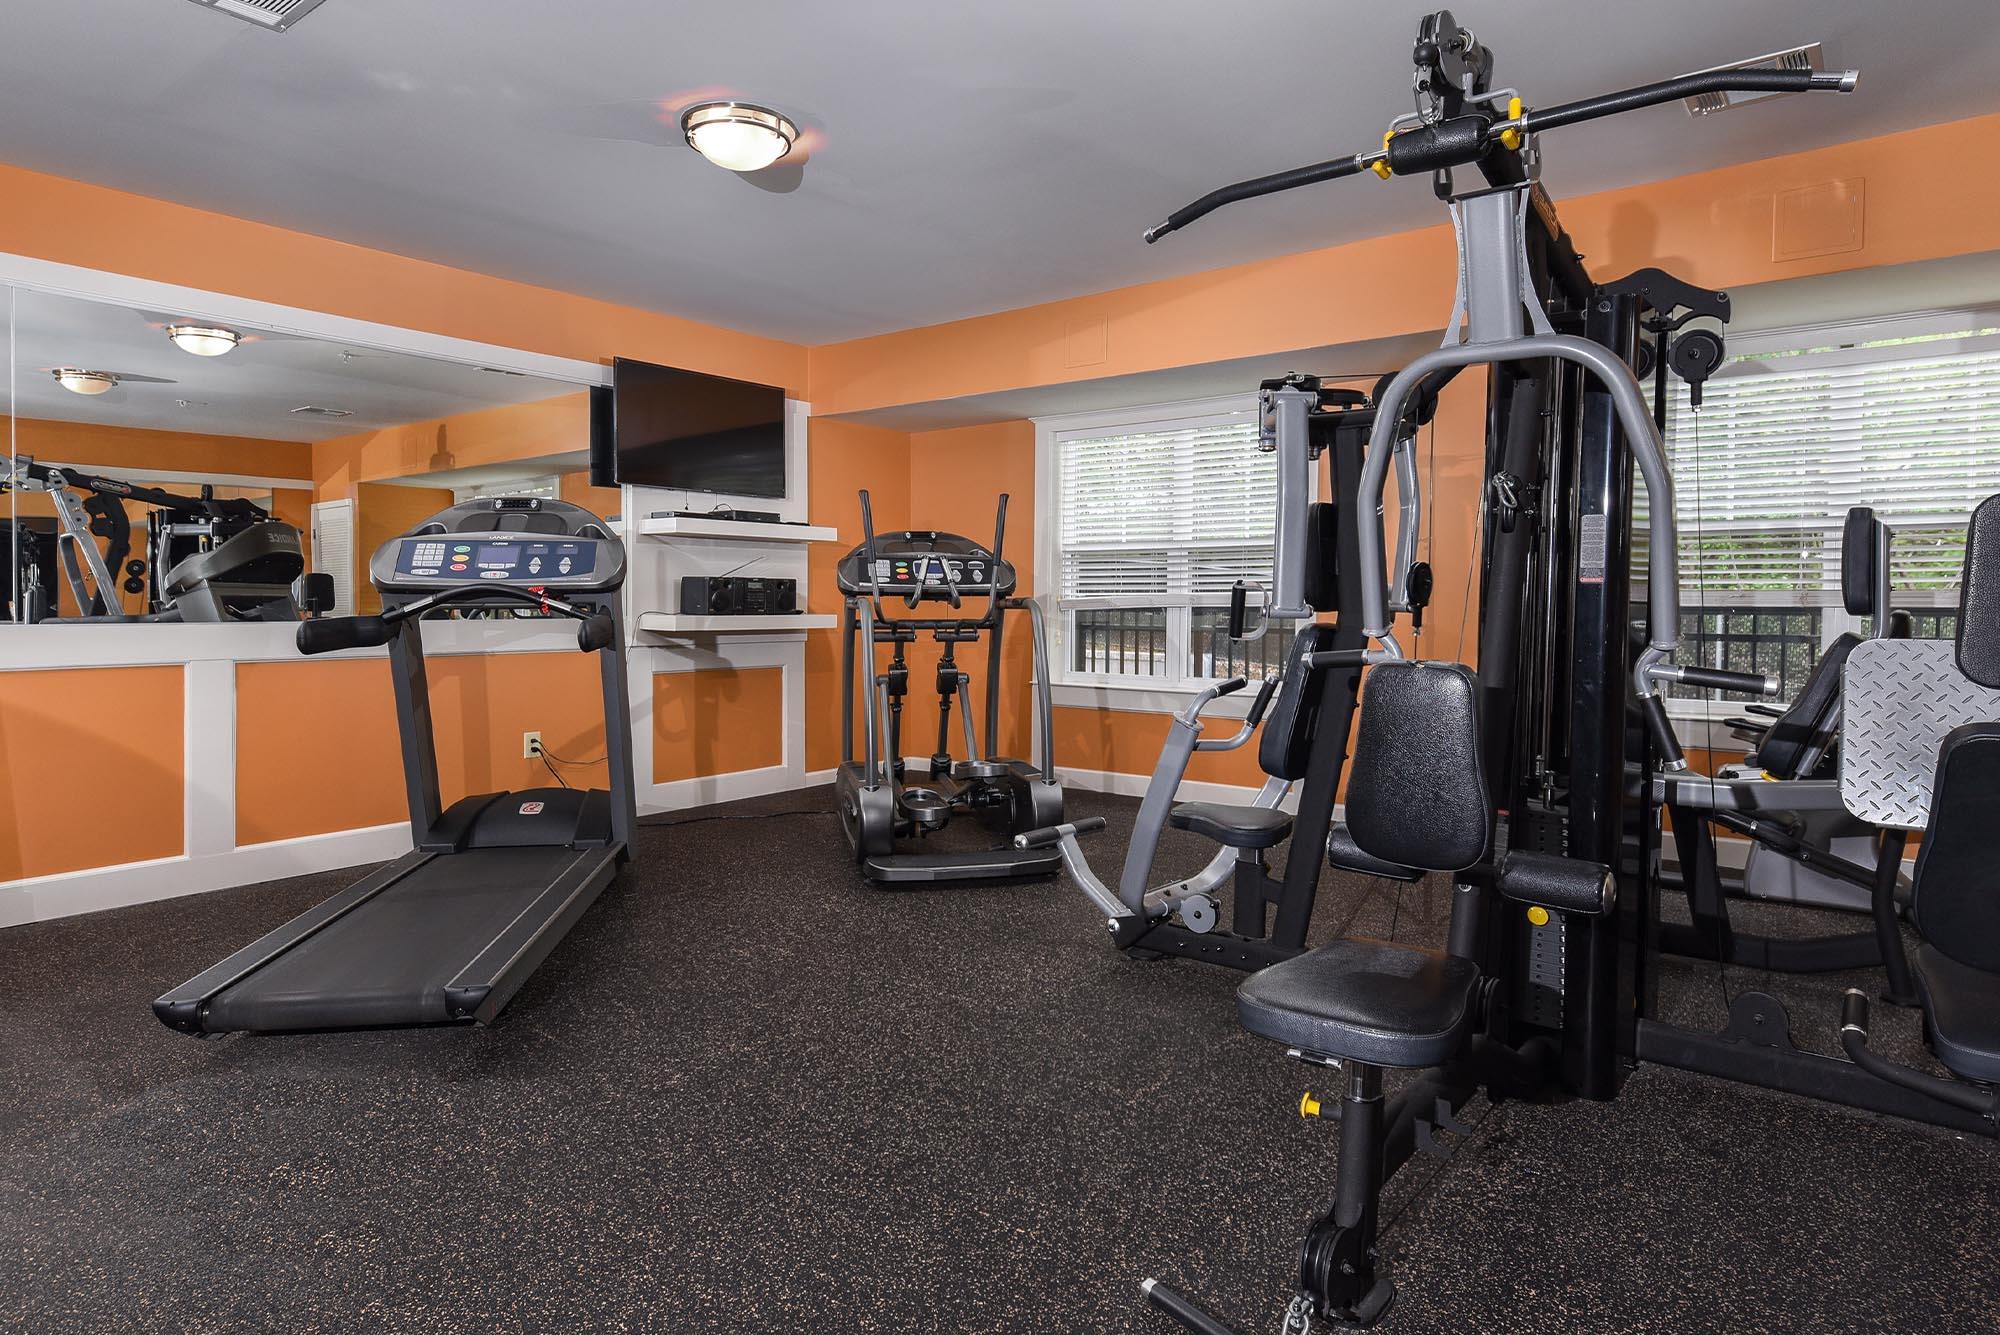 Fitness center at Parc at Maplewood Station in Maplewood, New Jersey